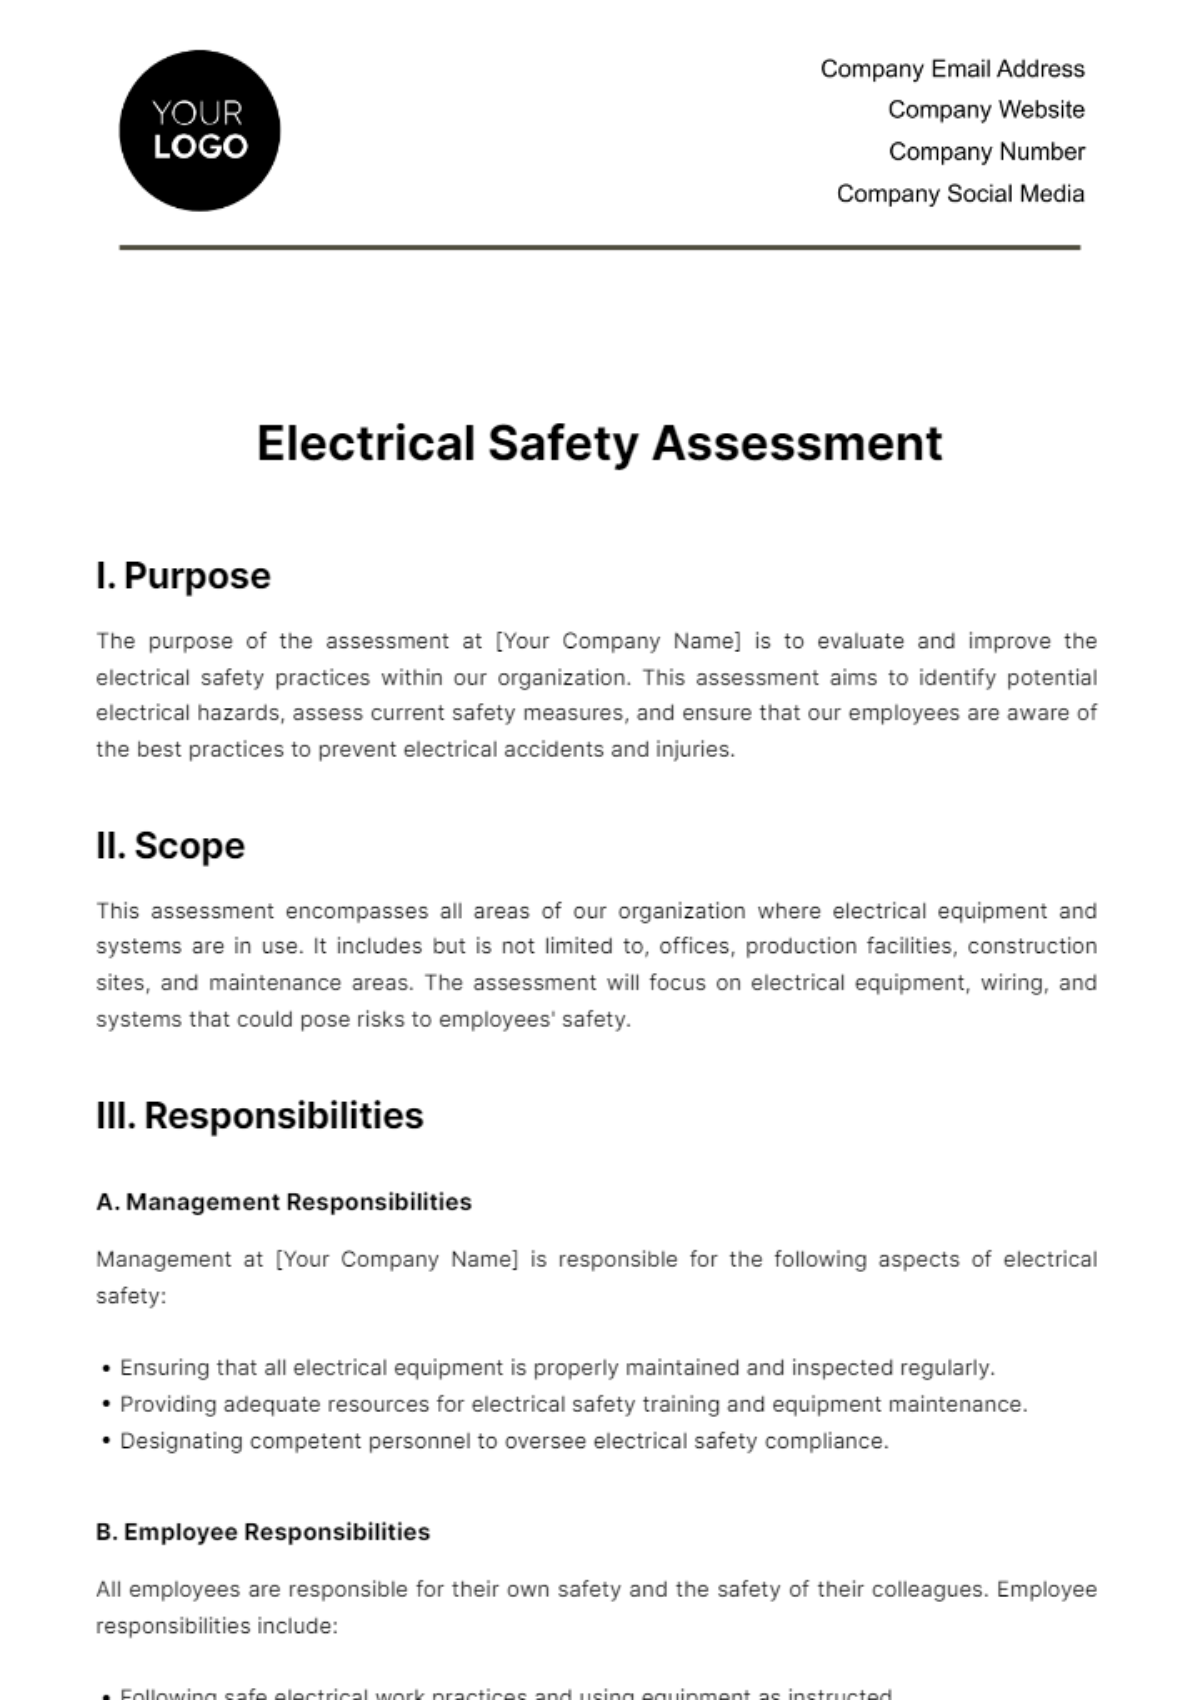 Free Electrical Safety Assessment HR Template